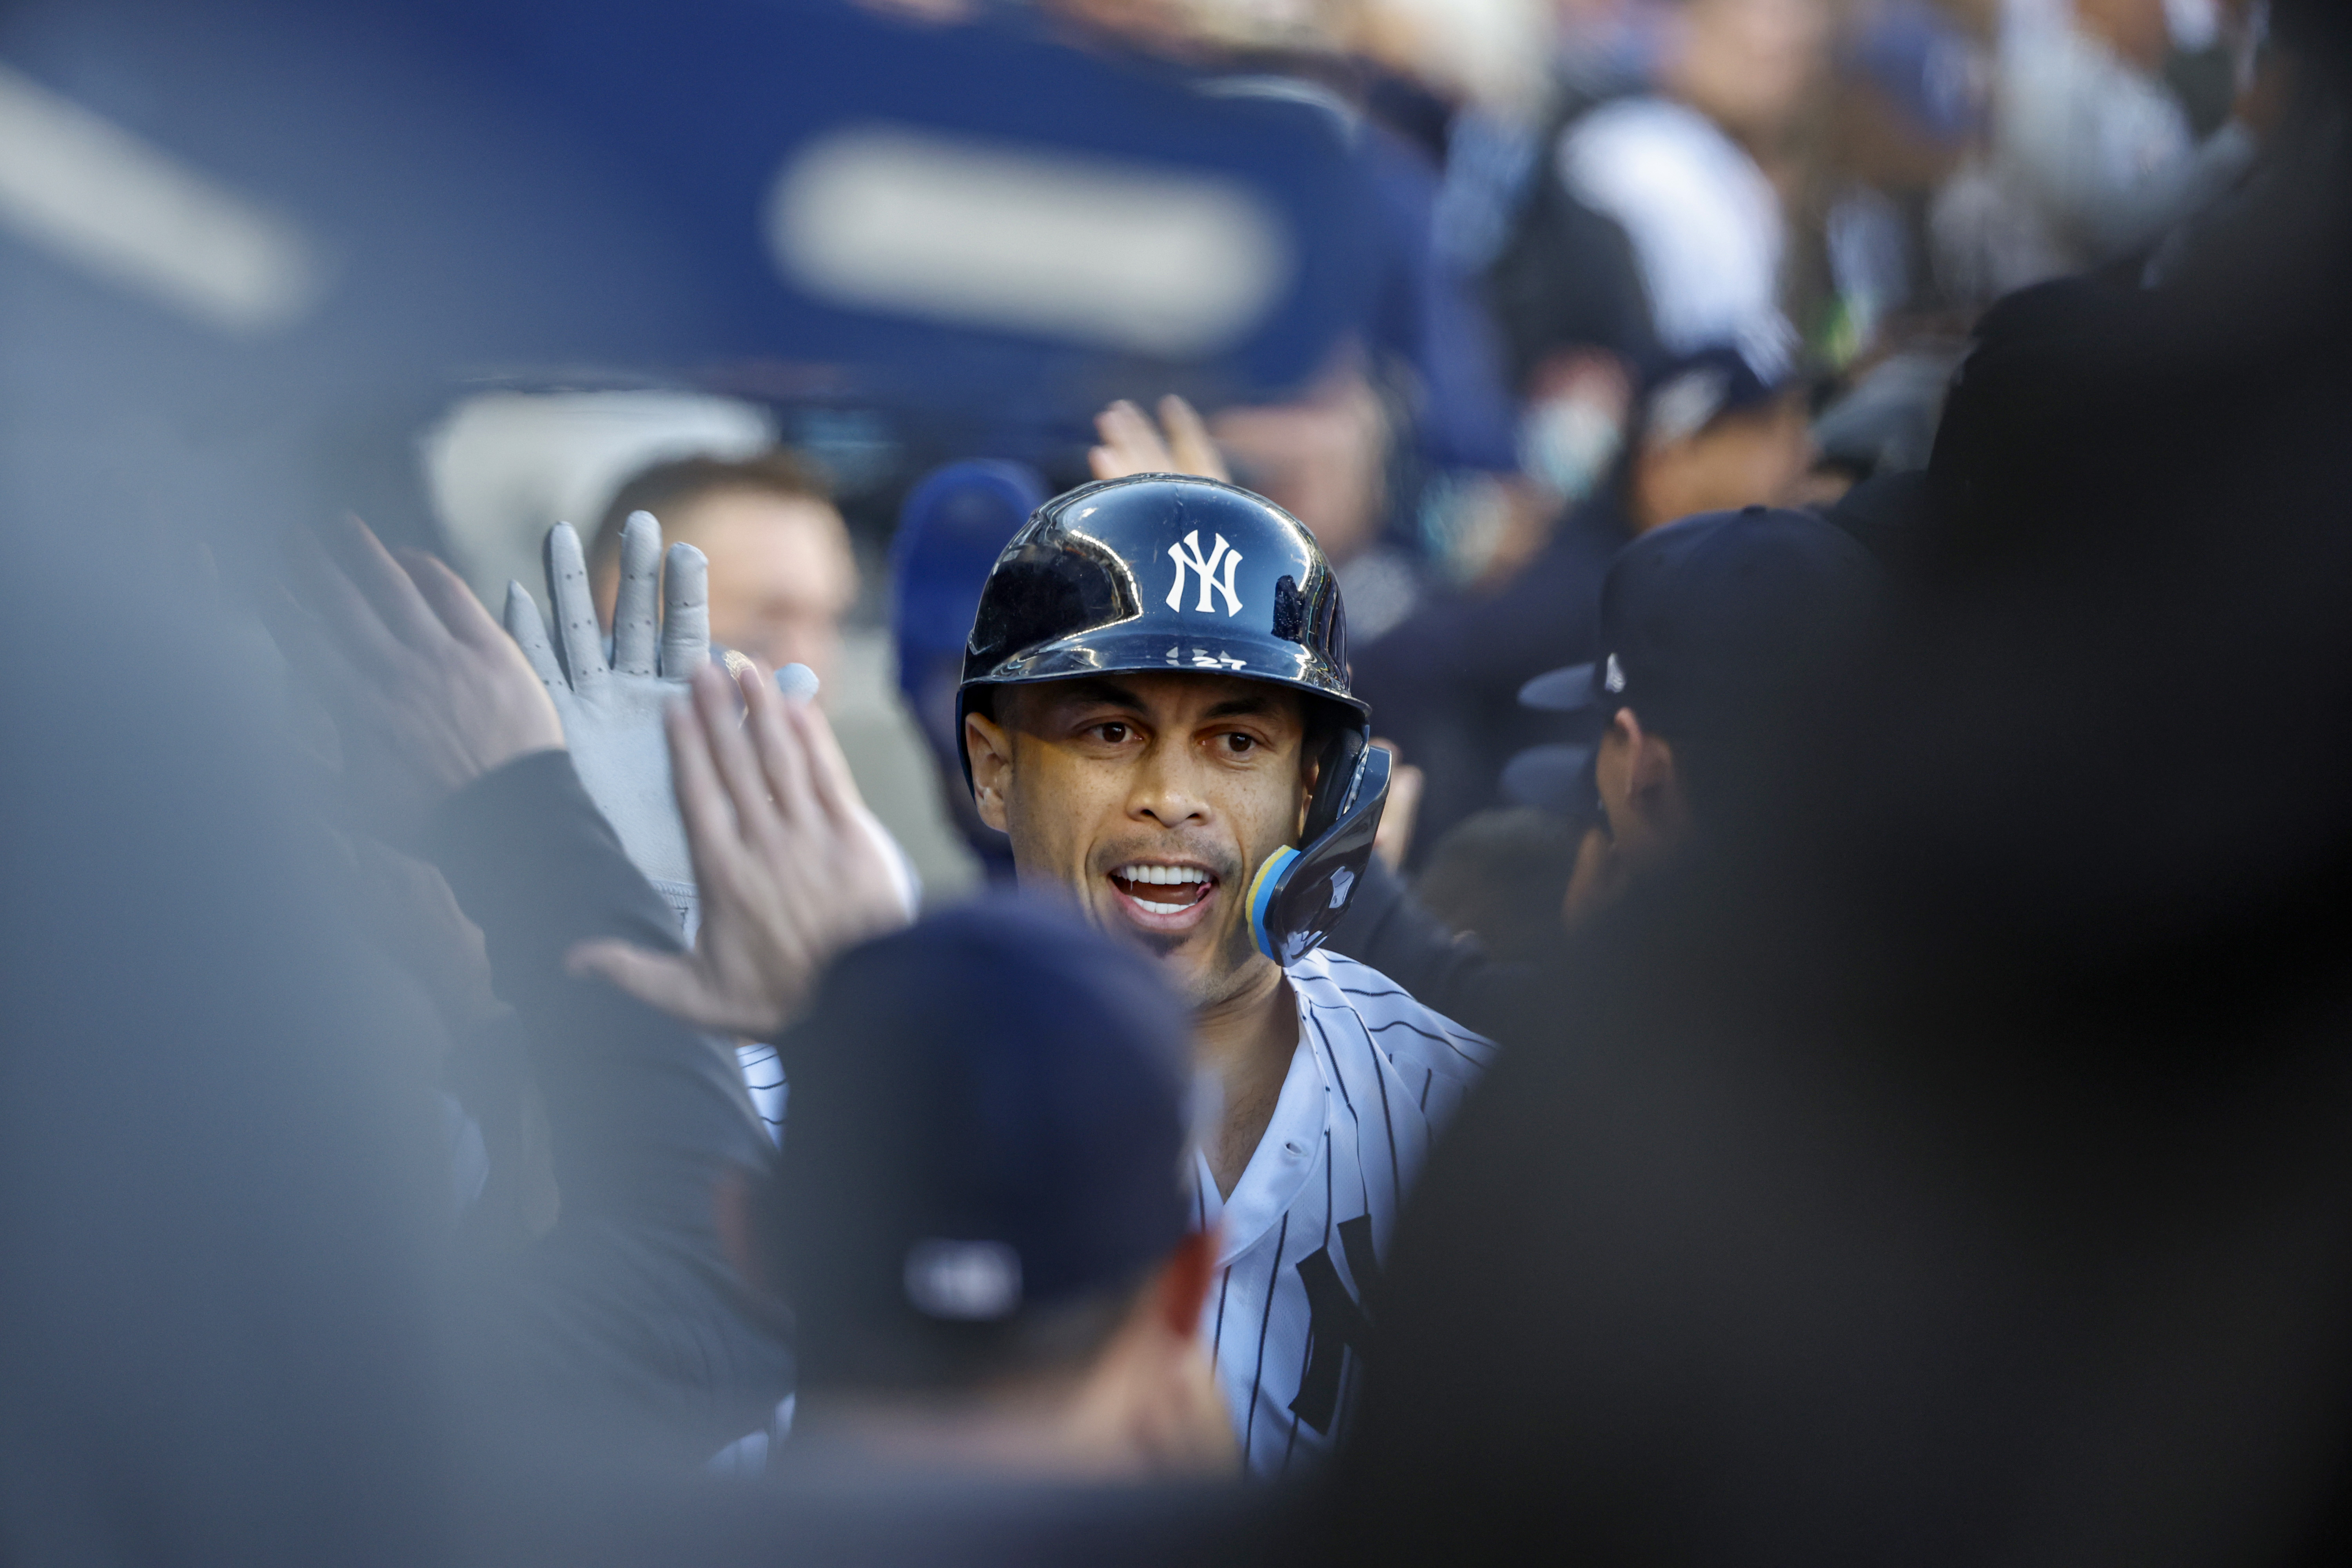 Yankees 2B Gleyber Torres Gets Revenge on Guardians DH Josh Naylor With Rock  the Baby Celebration - Sports Illustrated NY Yankees News, Analysis and More